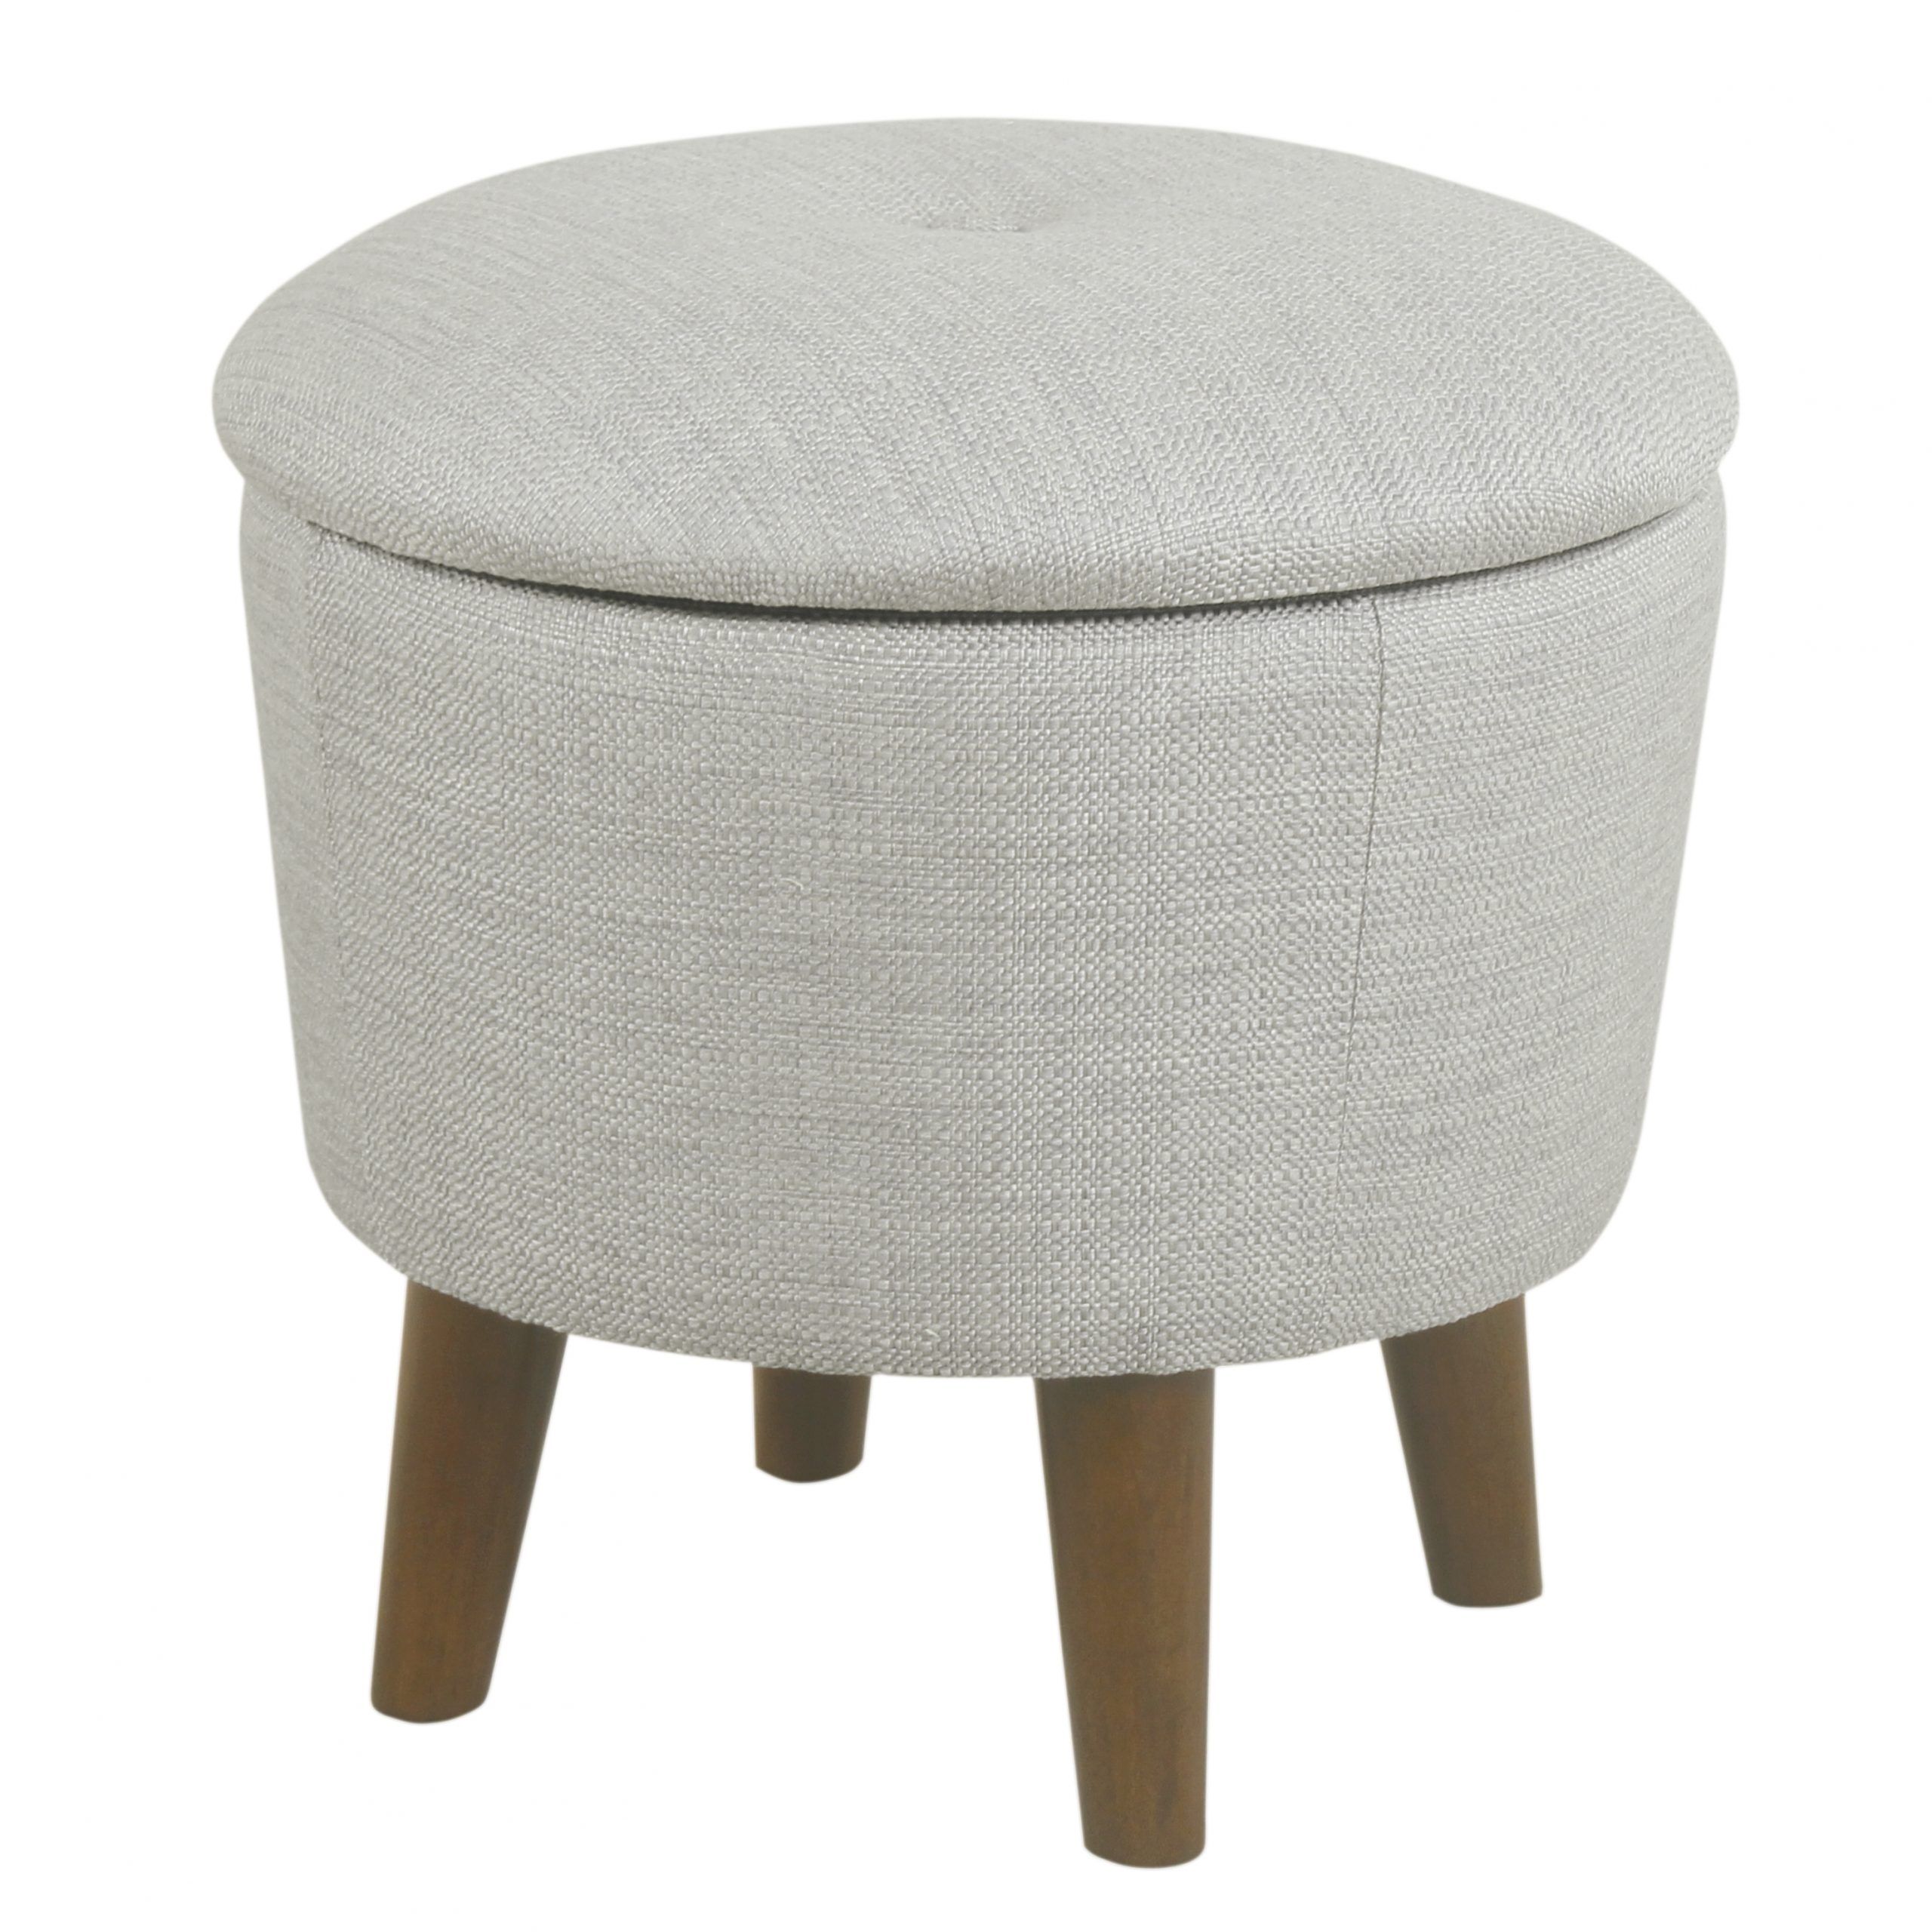 Wool Round Pouf Ottomans Inside Fashionable Homepop Modern Round Velvet Tufted Storage Ottoman, Multiple Colors (View 5 of 10)